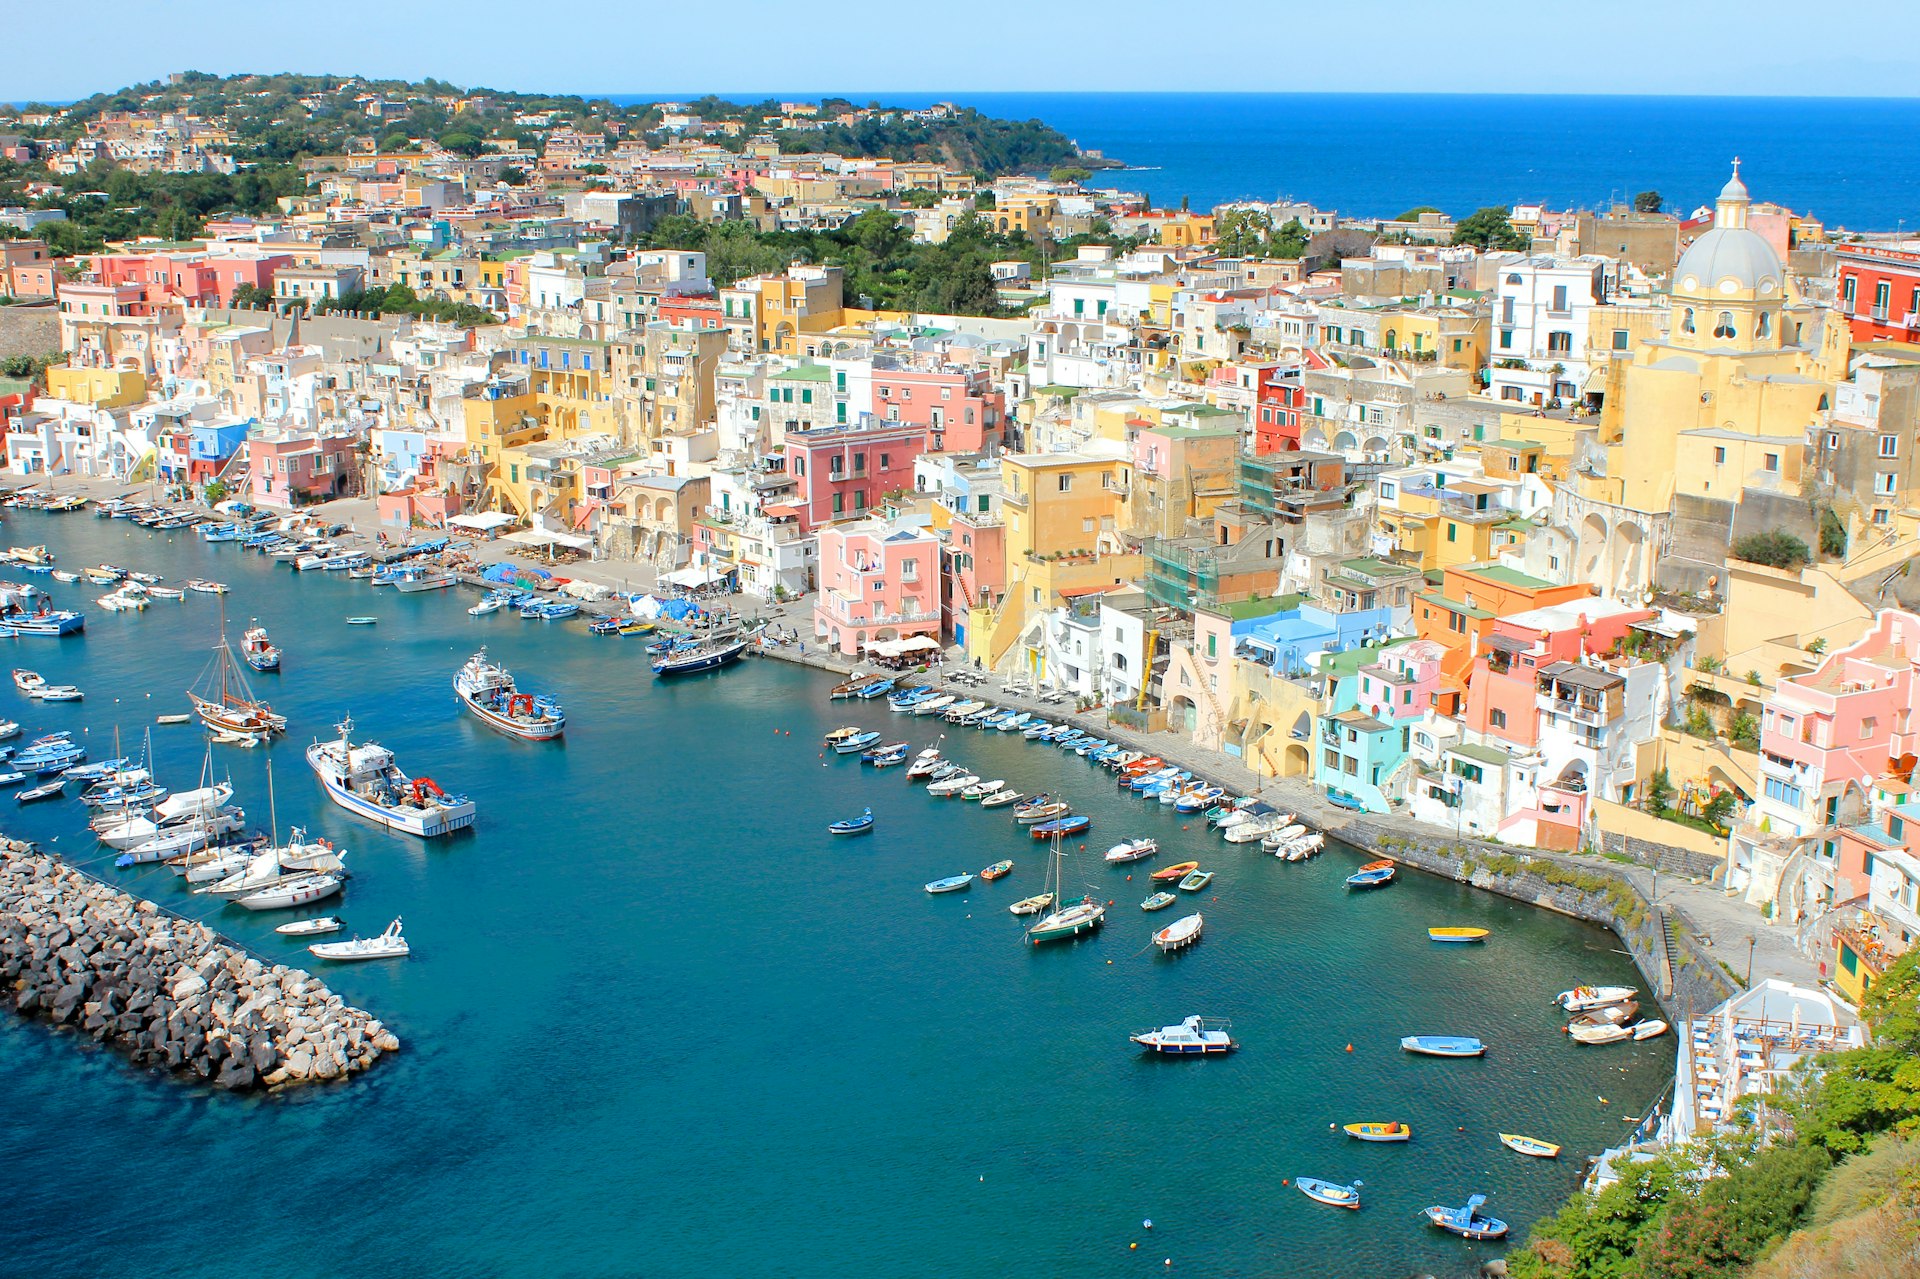 An aerial view of Procida's harbour